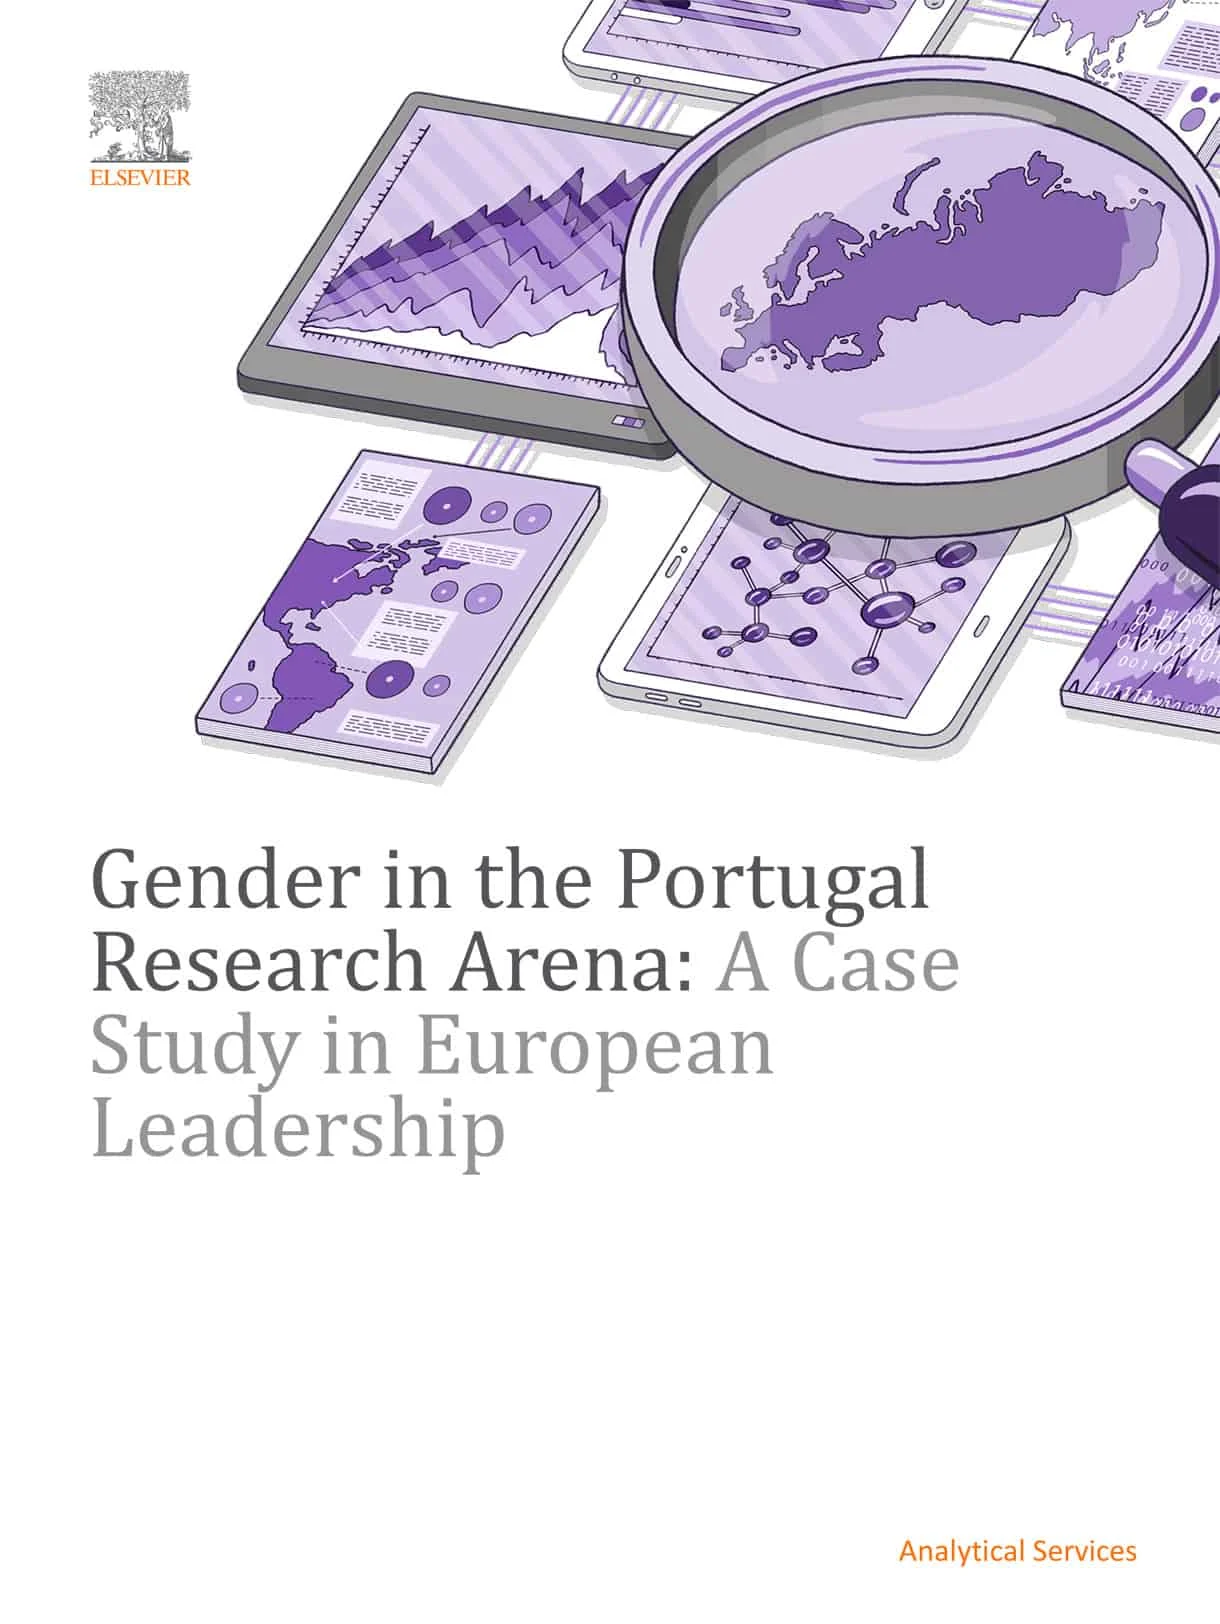 Cover of the report "Gender in the Portugal Research Arena"